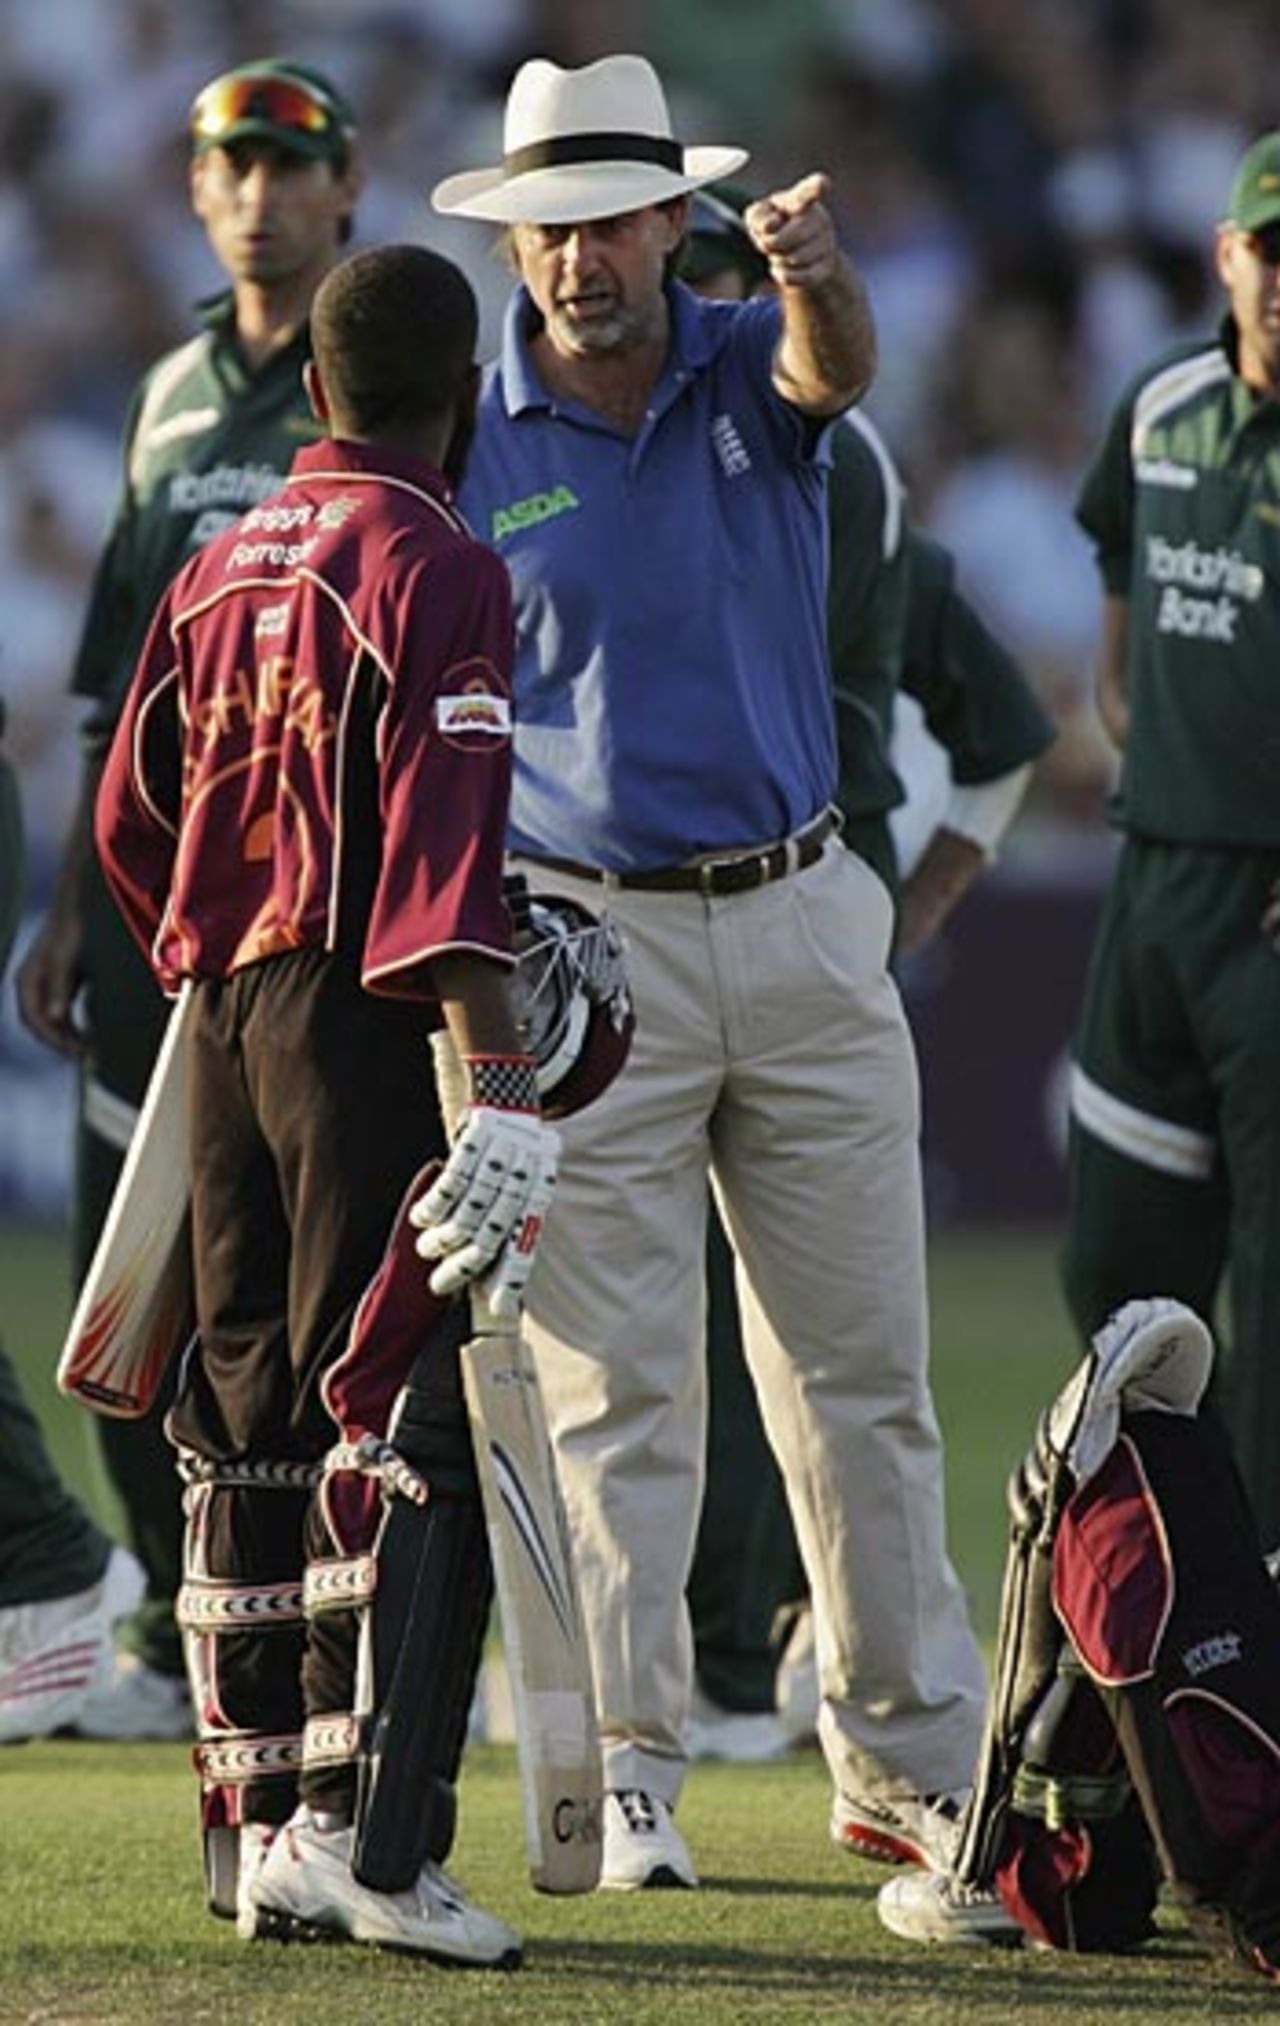 Peter Willey sends Bilal Shafayat on his way after Rikki Wessels was run out after a mix-up and had to be carried off the field on a stretcher, Nottinghamshire v Northamptonshire, Twenty20 Quarter-final, Trent Bridge, July 24, 2006